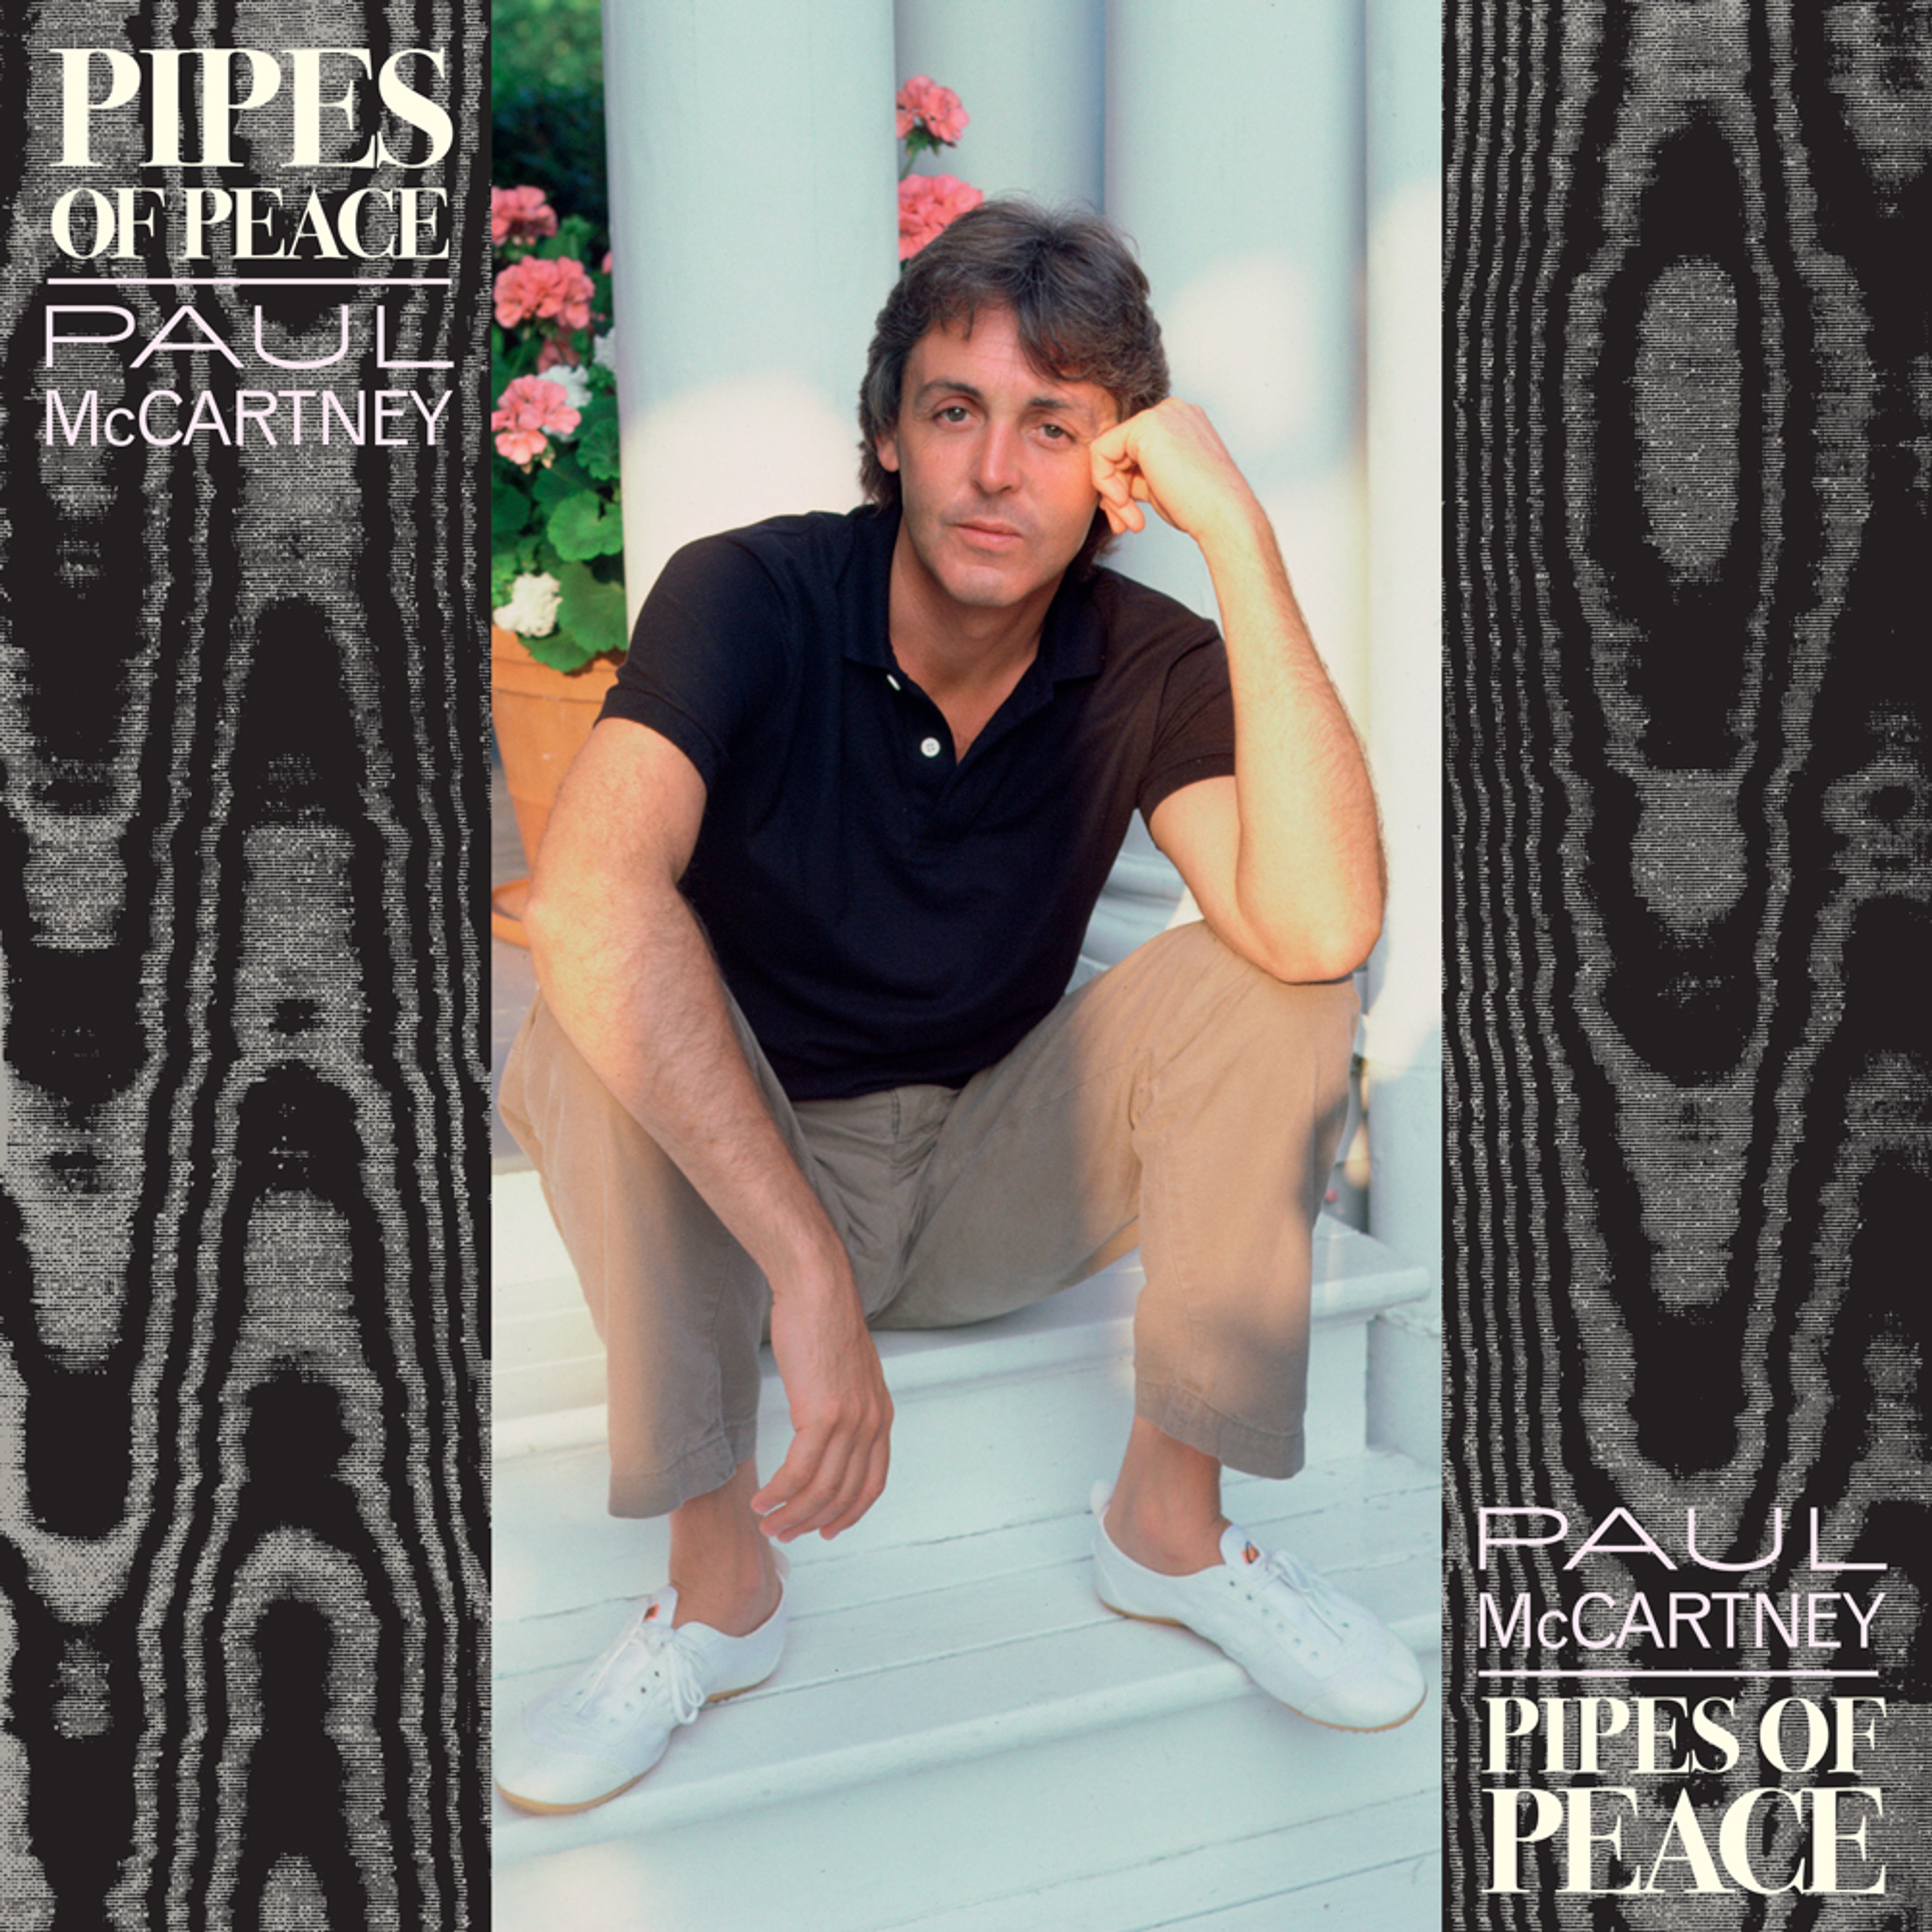 “Pipes of Peace” Single artwork as featured in 'The 7" Singles Box'